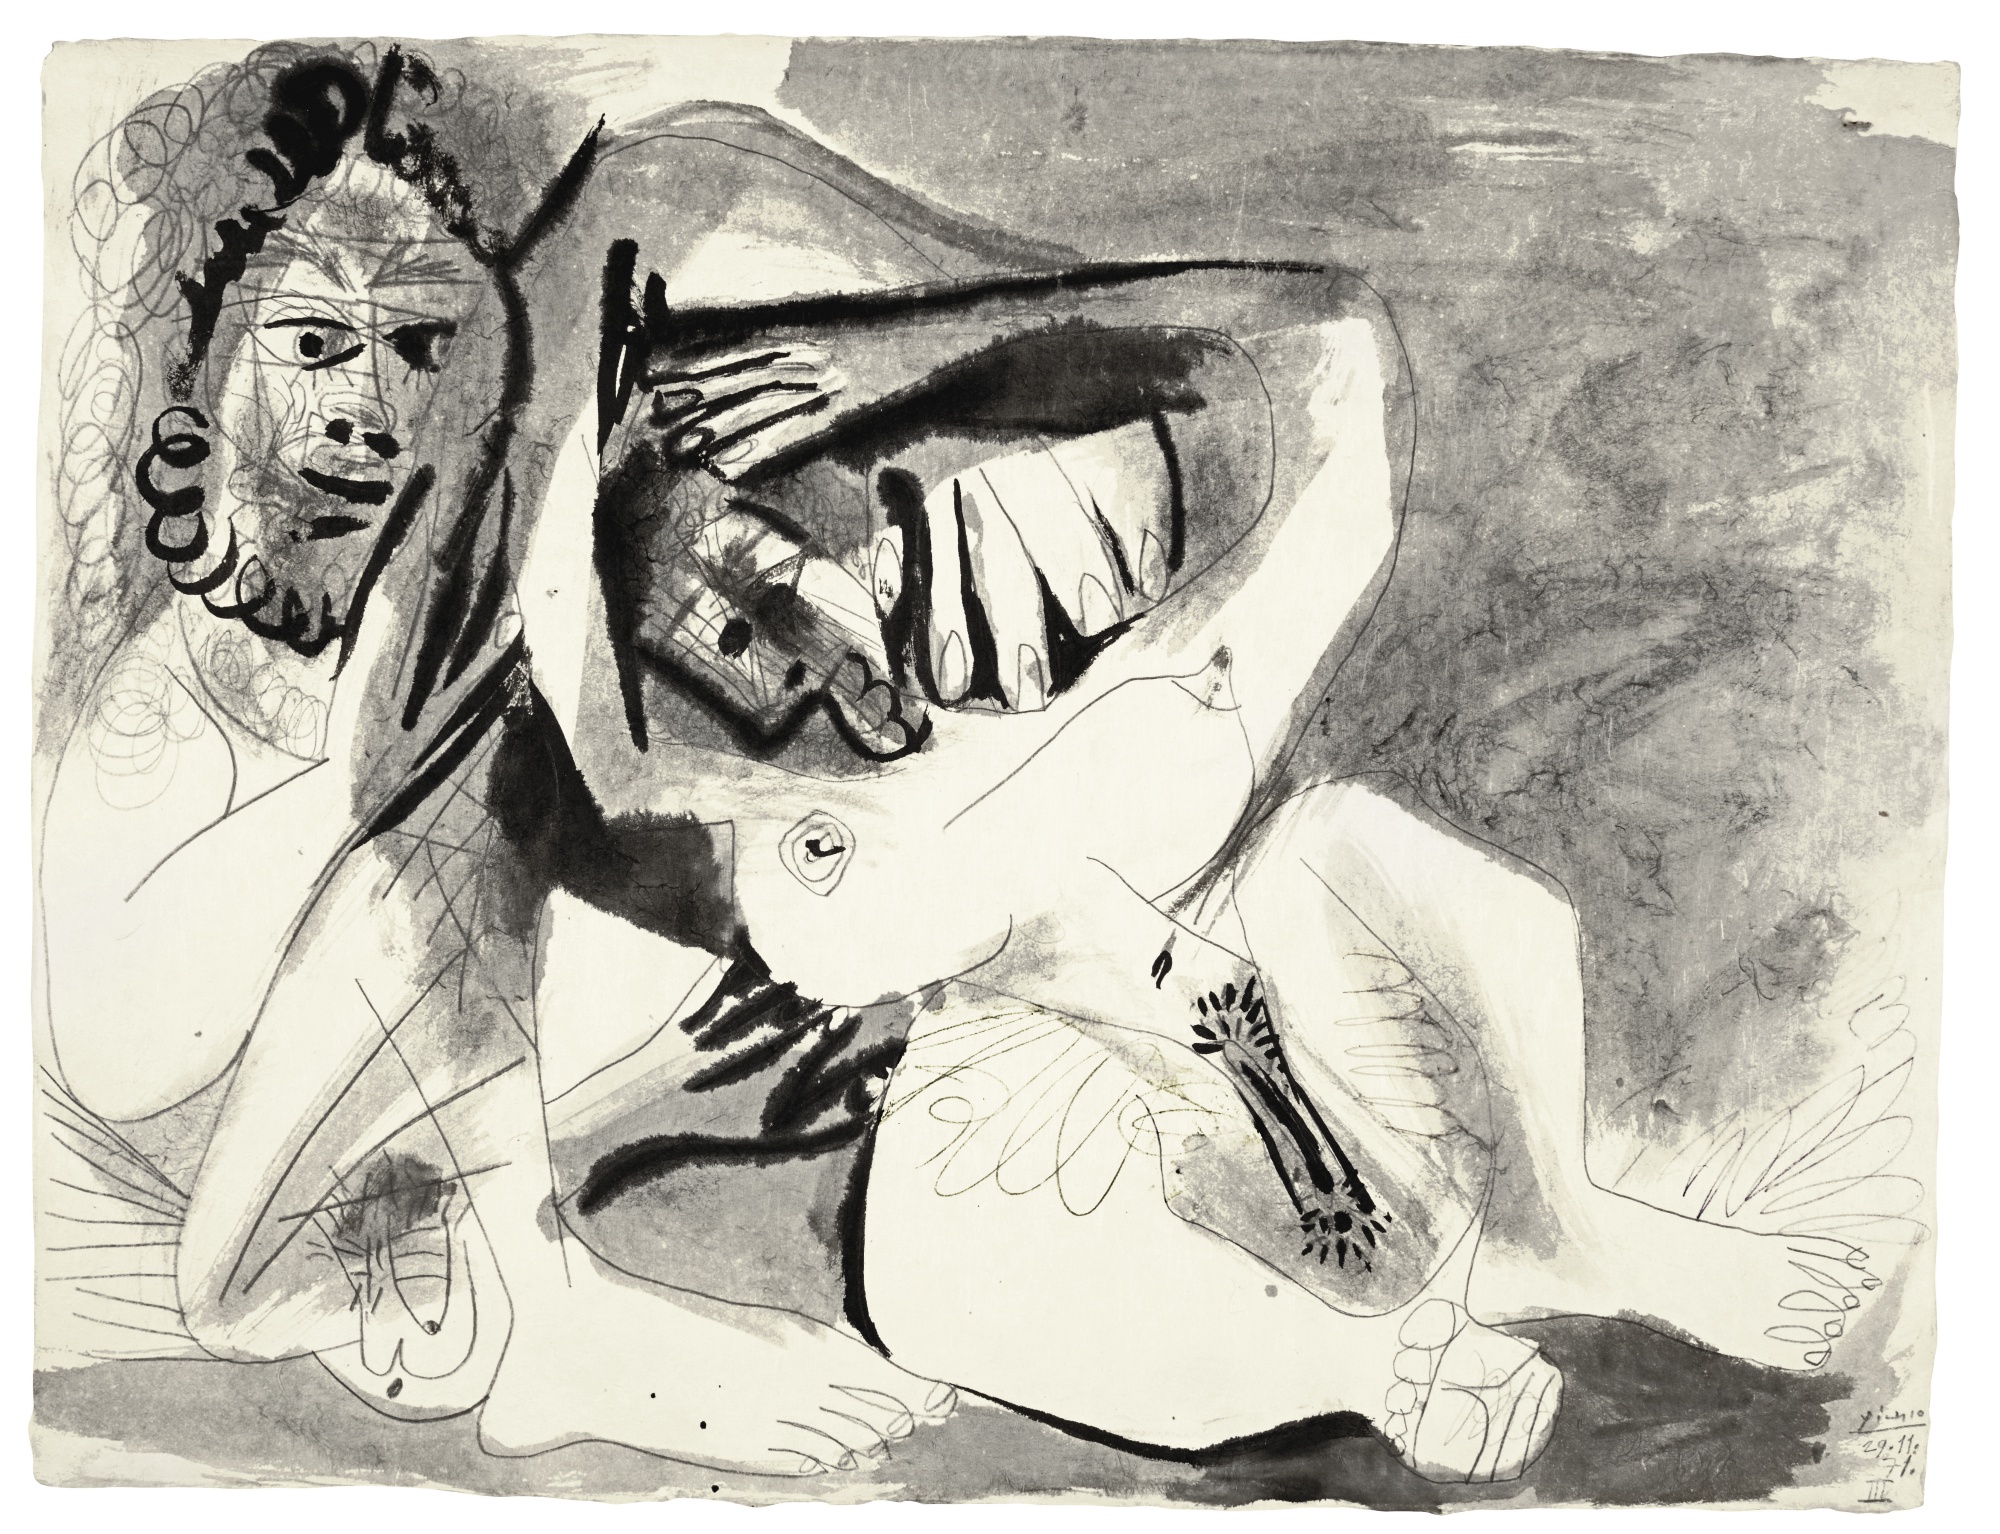 Homme et Femme Nus (1971) by Pablo Picasso, lot No 16 in Sotheby’s forthcoming sale